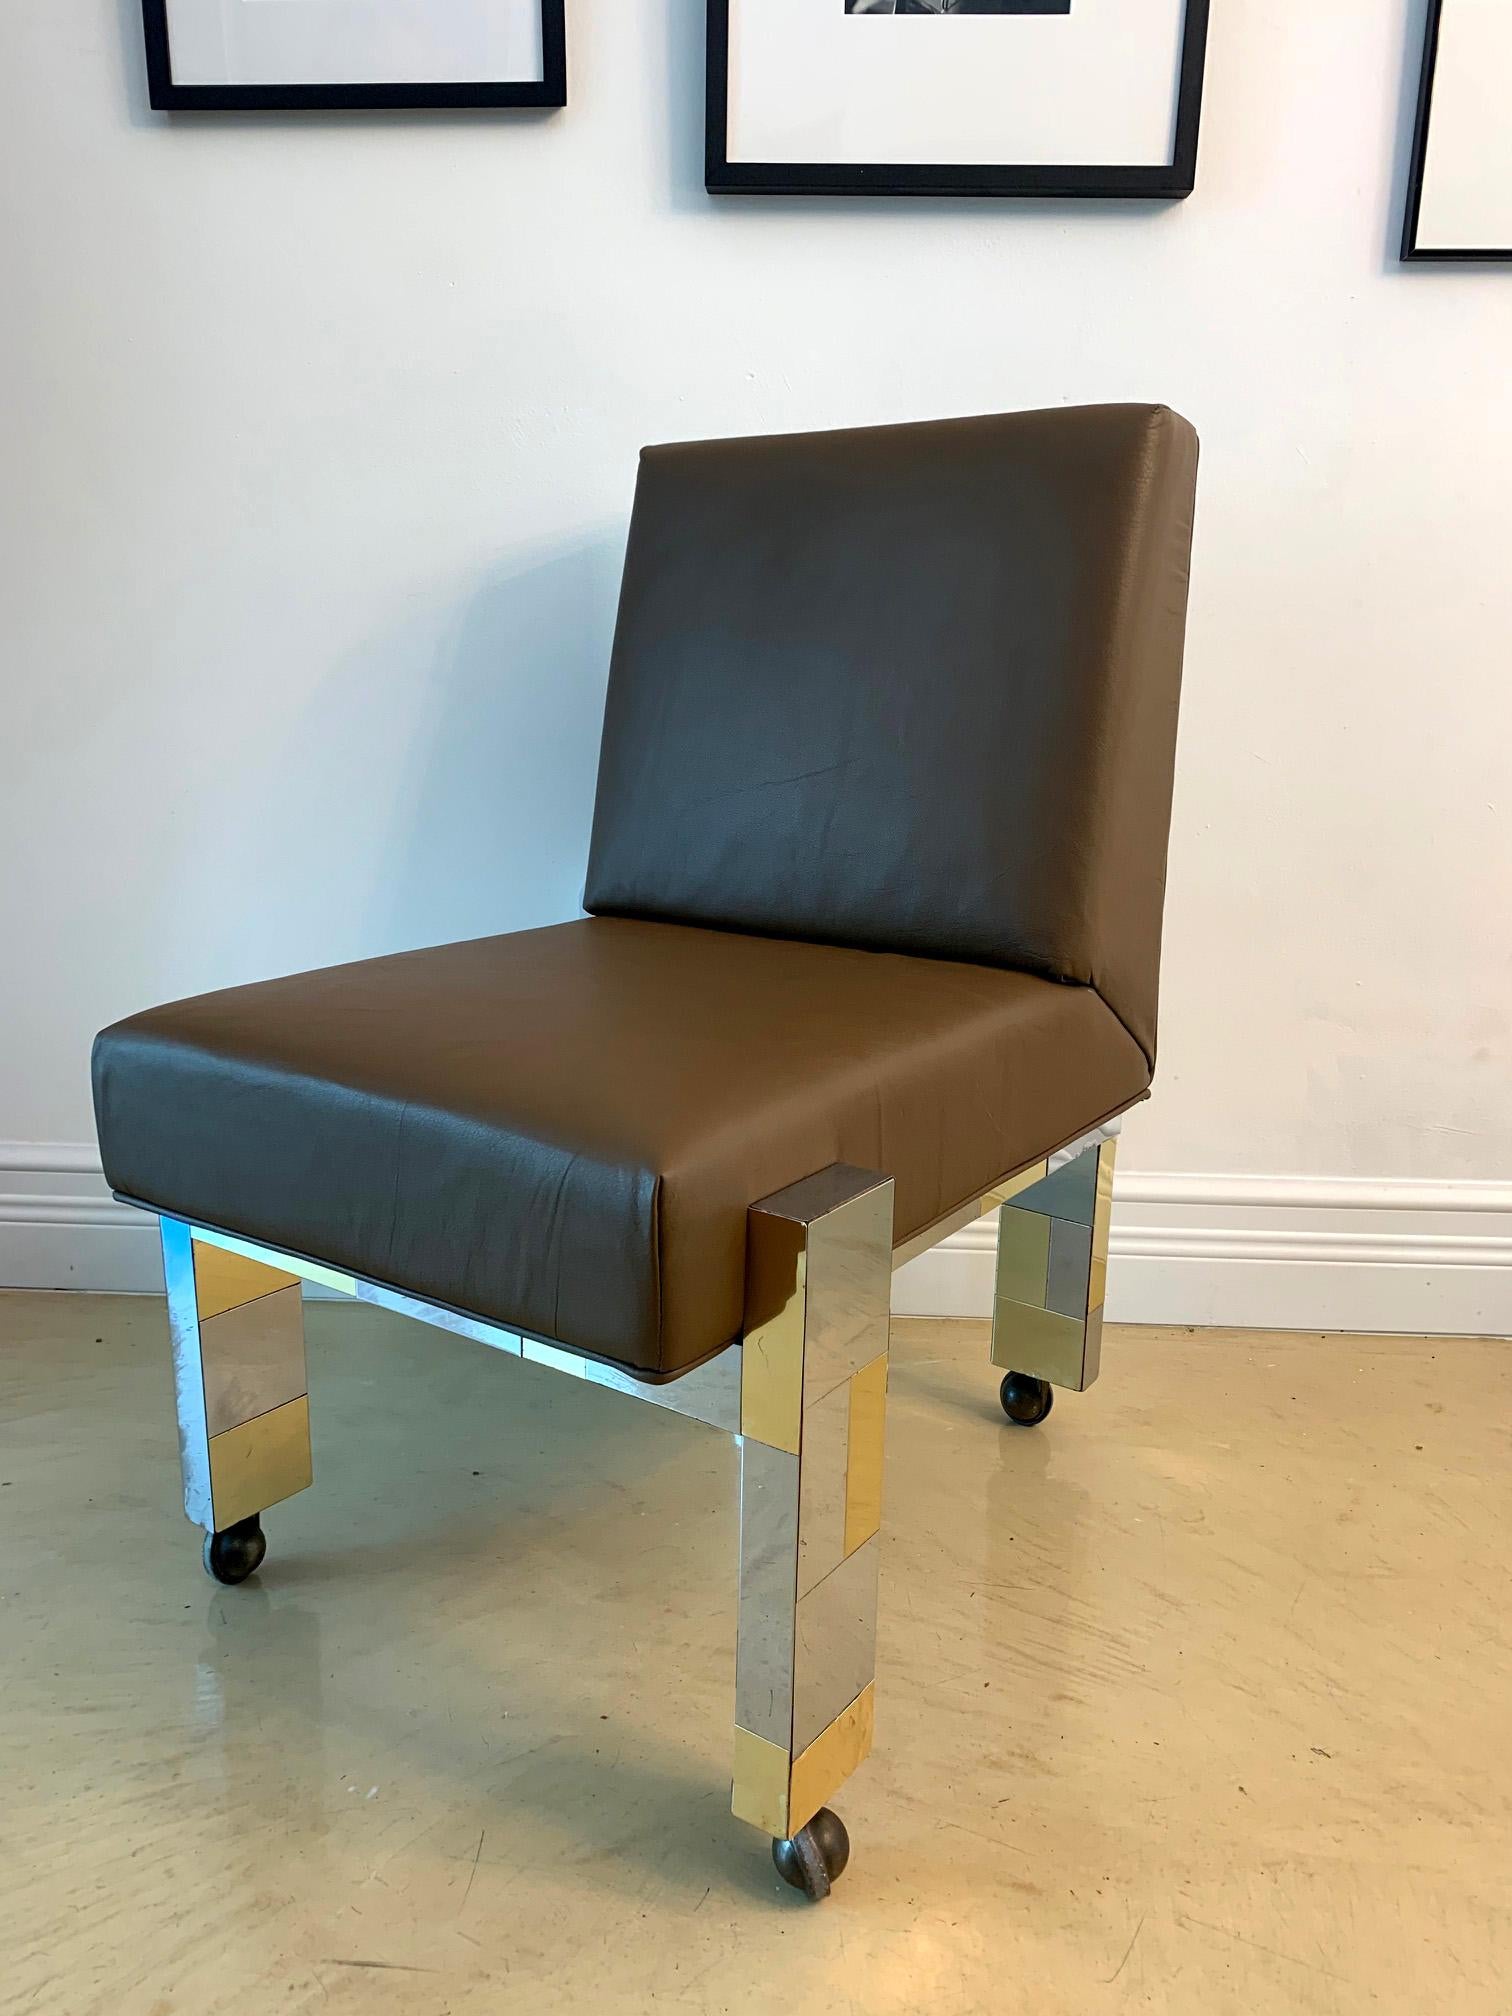 A wonderful cityscape chair in chrome and brass patchwork made by Paul Evans studio for Directional, circa 1974. The chair is supported by exposed legs that extend to the back, giving an interesting profile from the all sides, especially with the